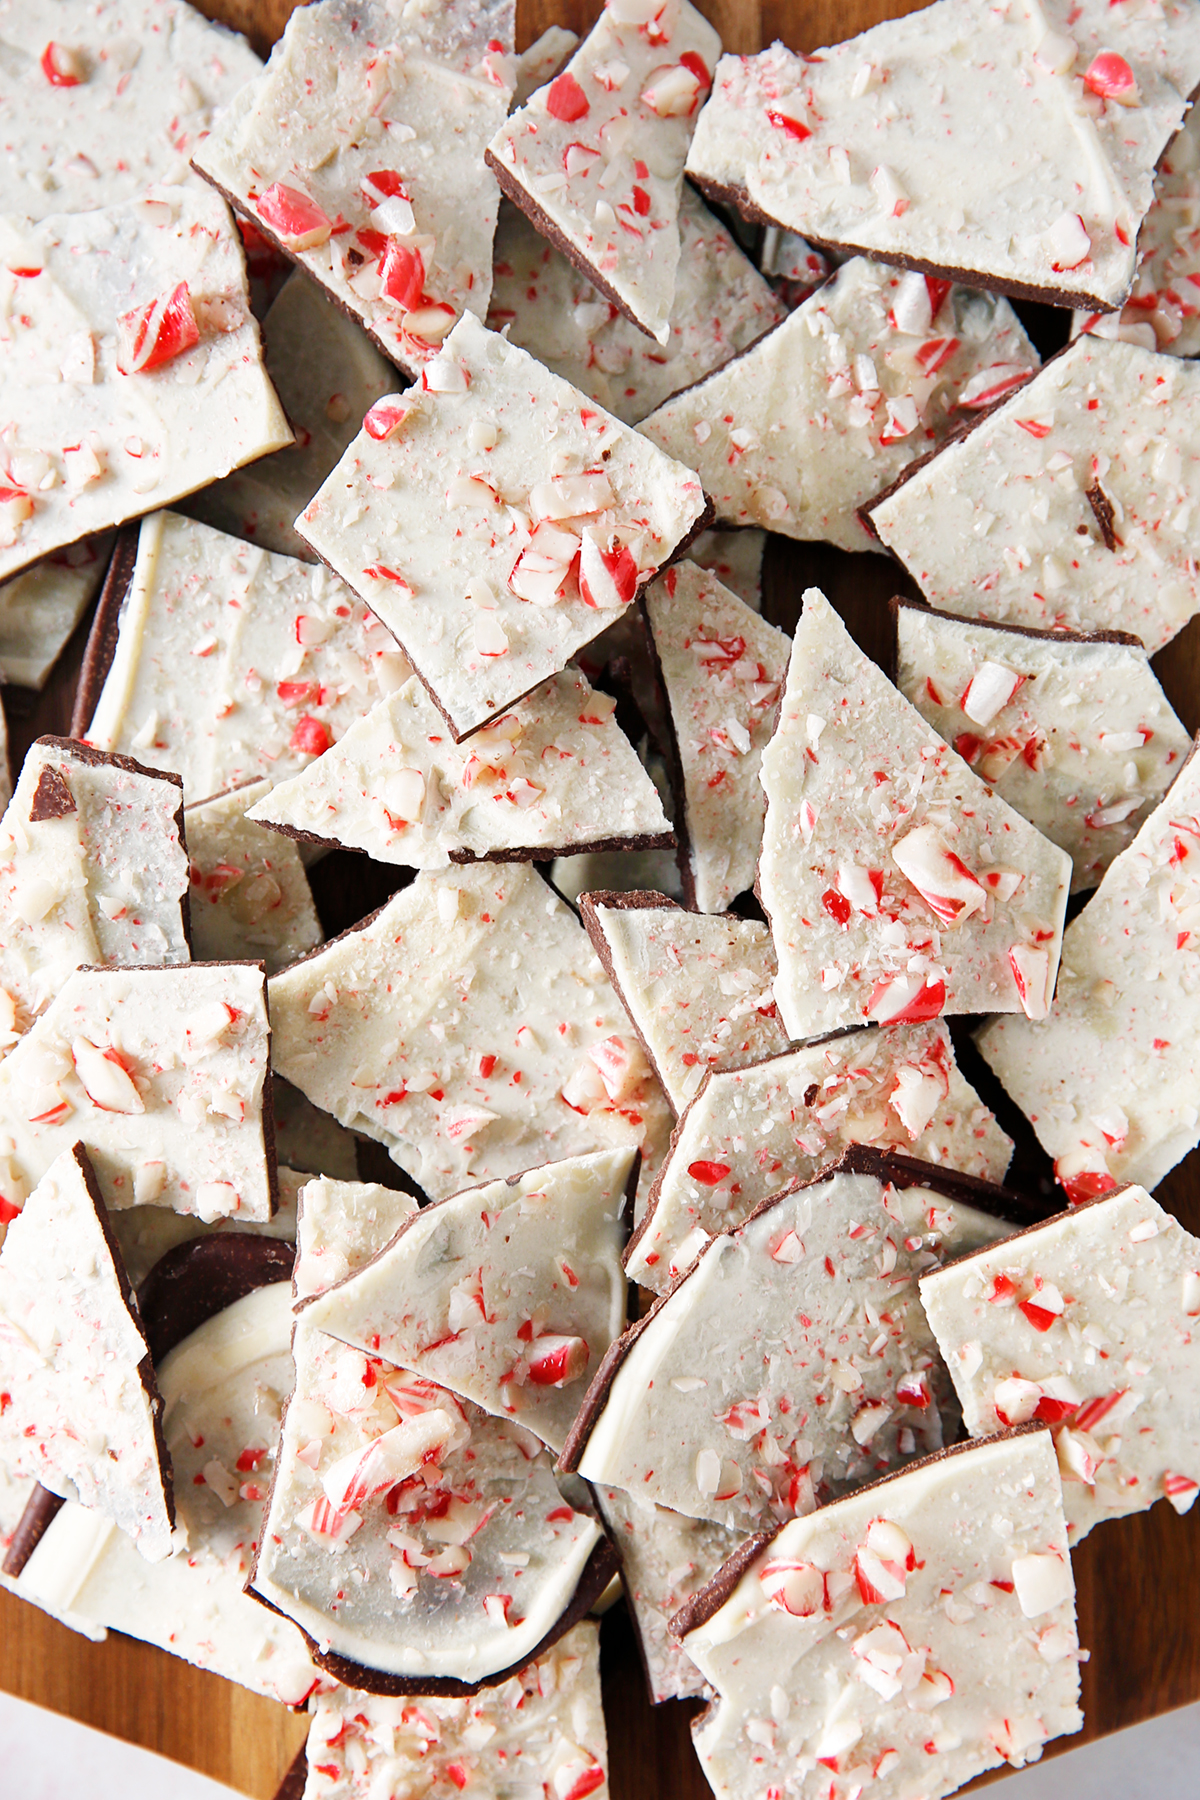 Pieces of peppermint bark.